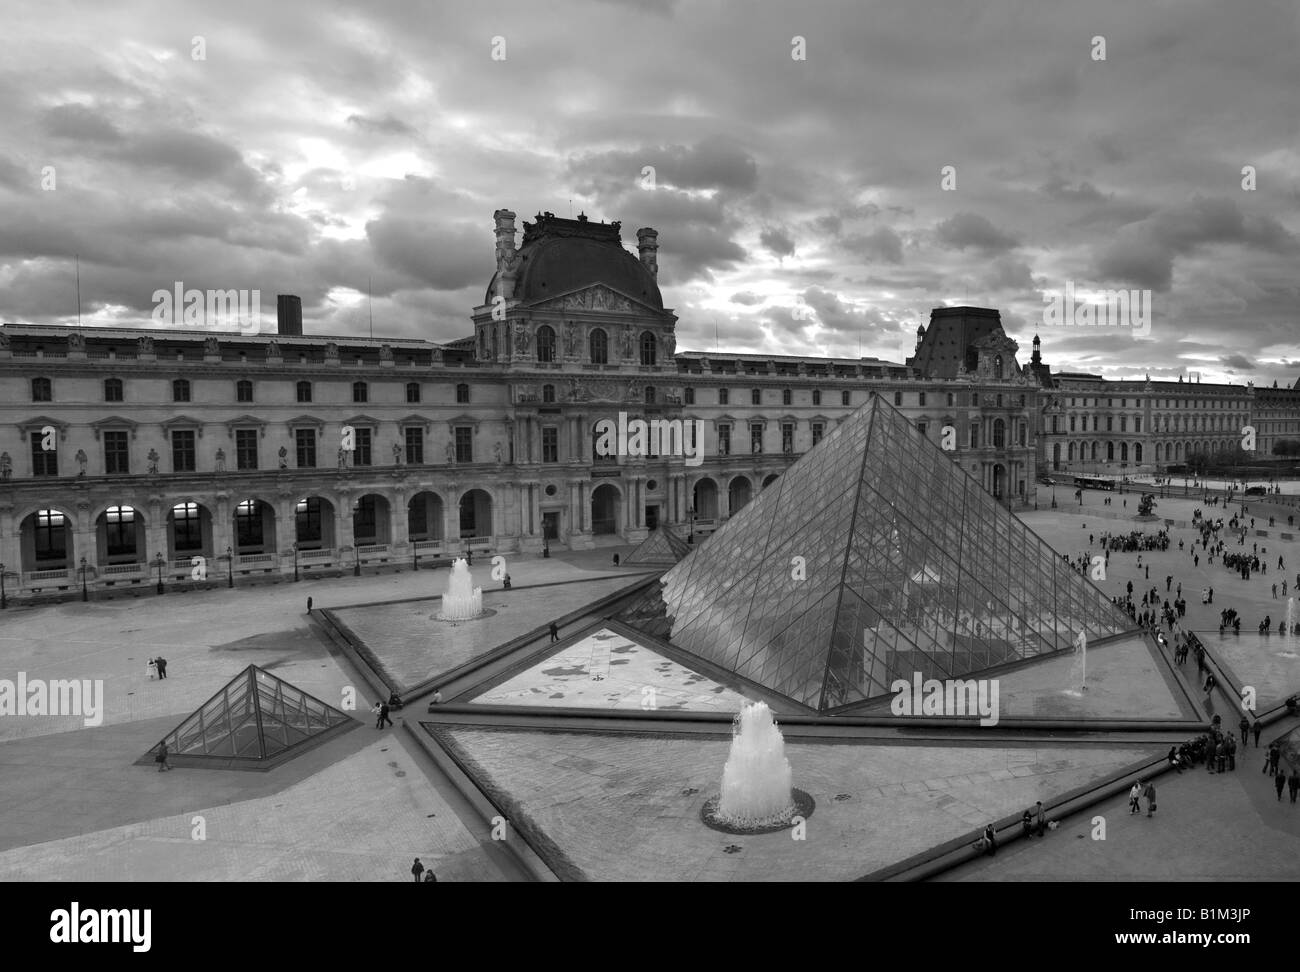 Courtyard and glass pyramid of the Louvre Museum in Paris France Stock Photo